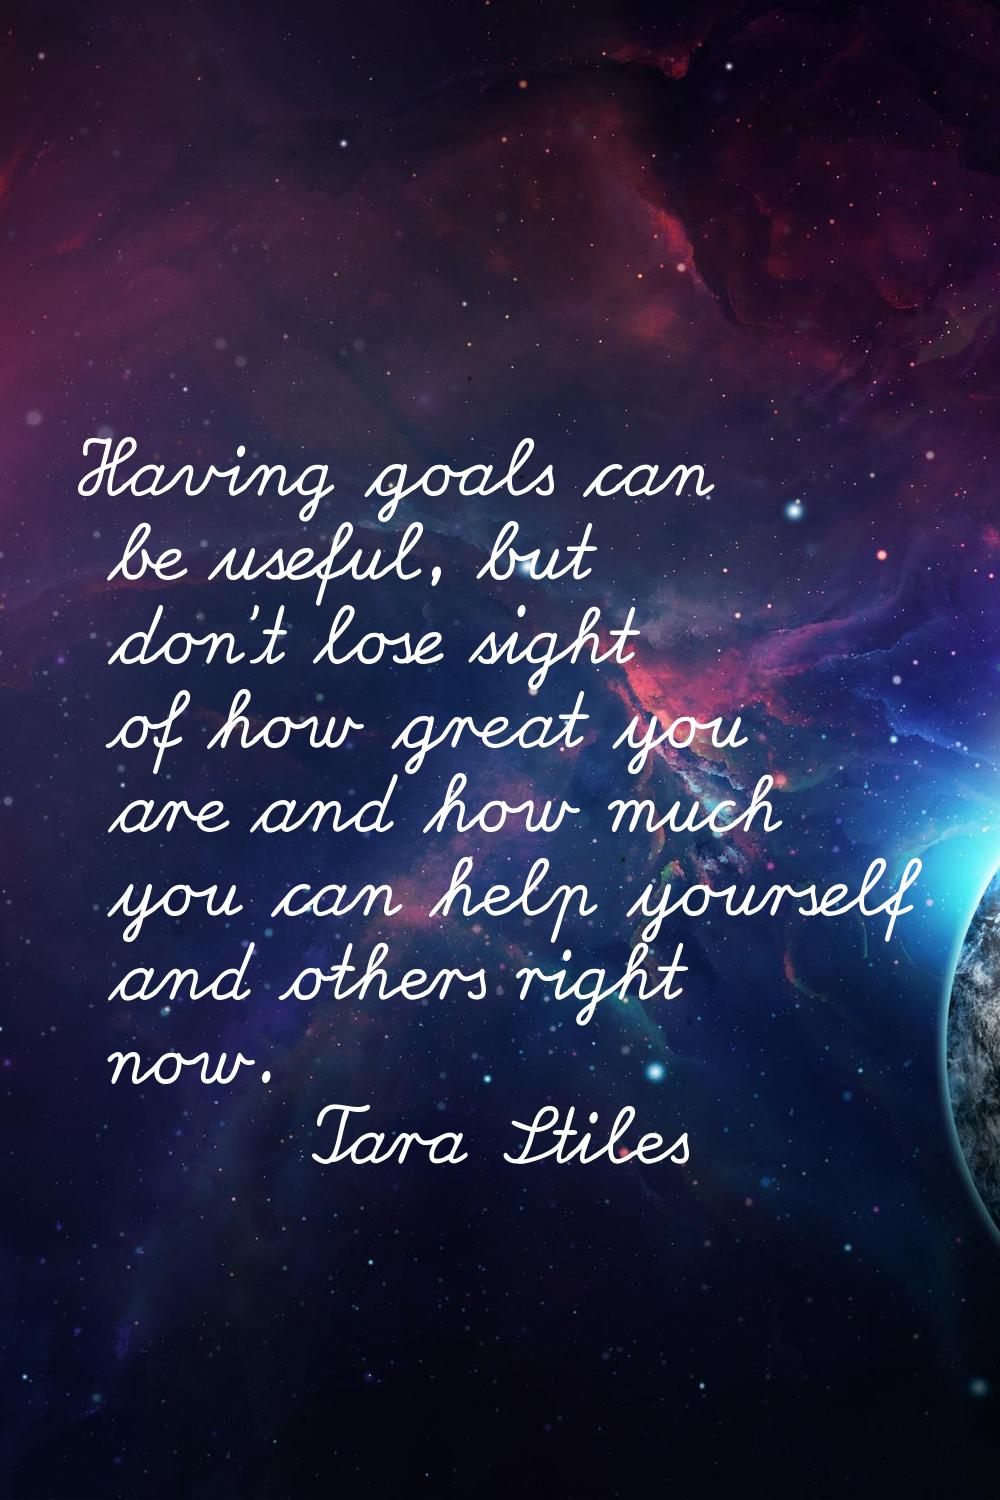 Having goals can be useful, but don't lose sight of how great you are and how much you can help you